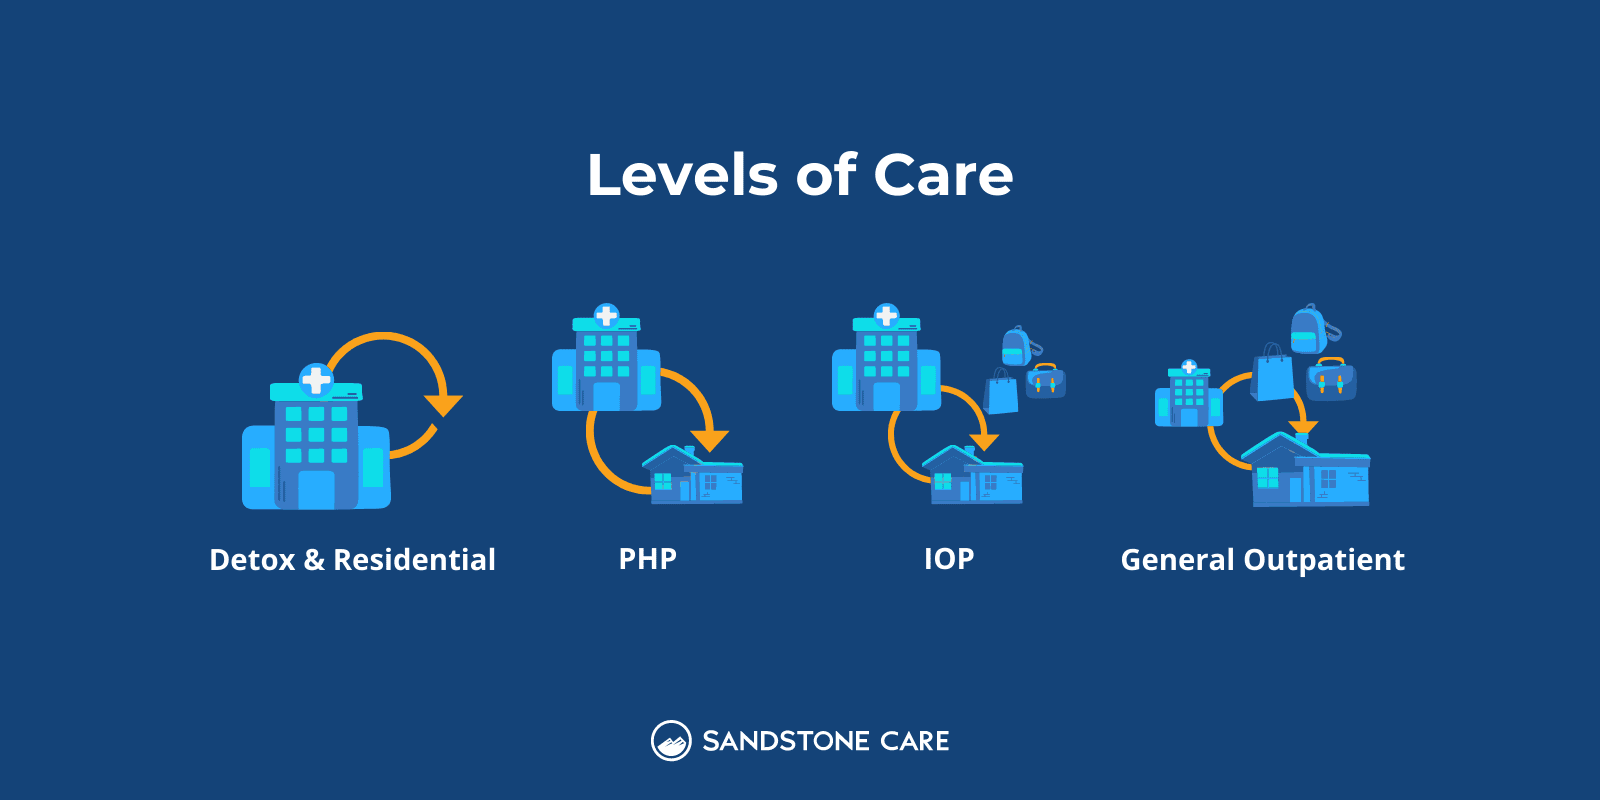 "Levels Of Care" title written above 4 different levels of care with relevant illustrations